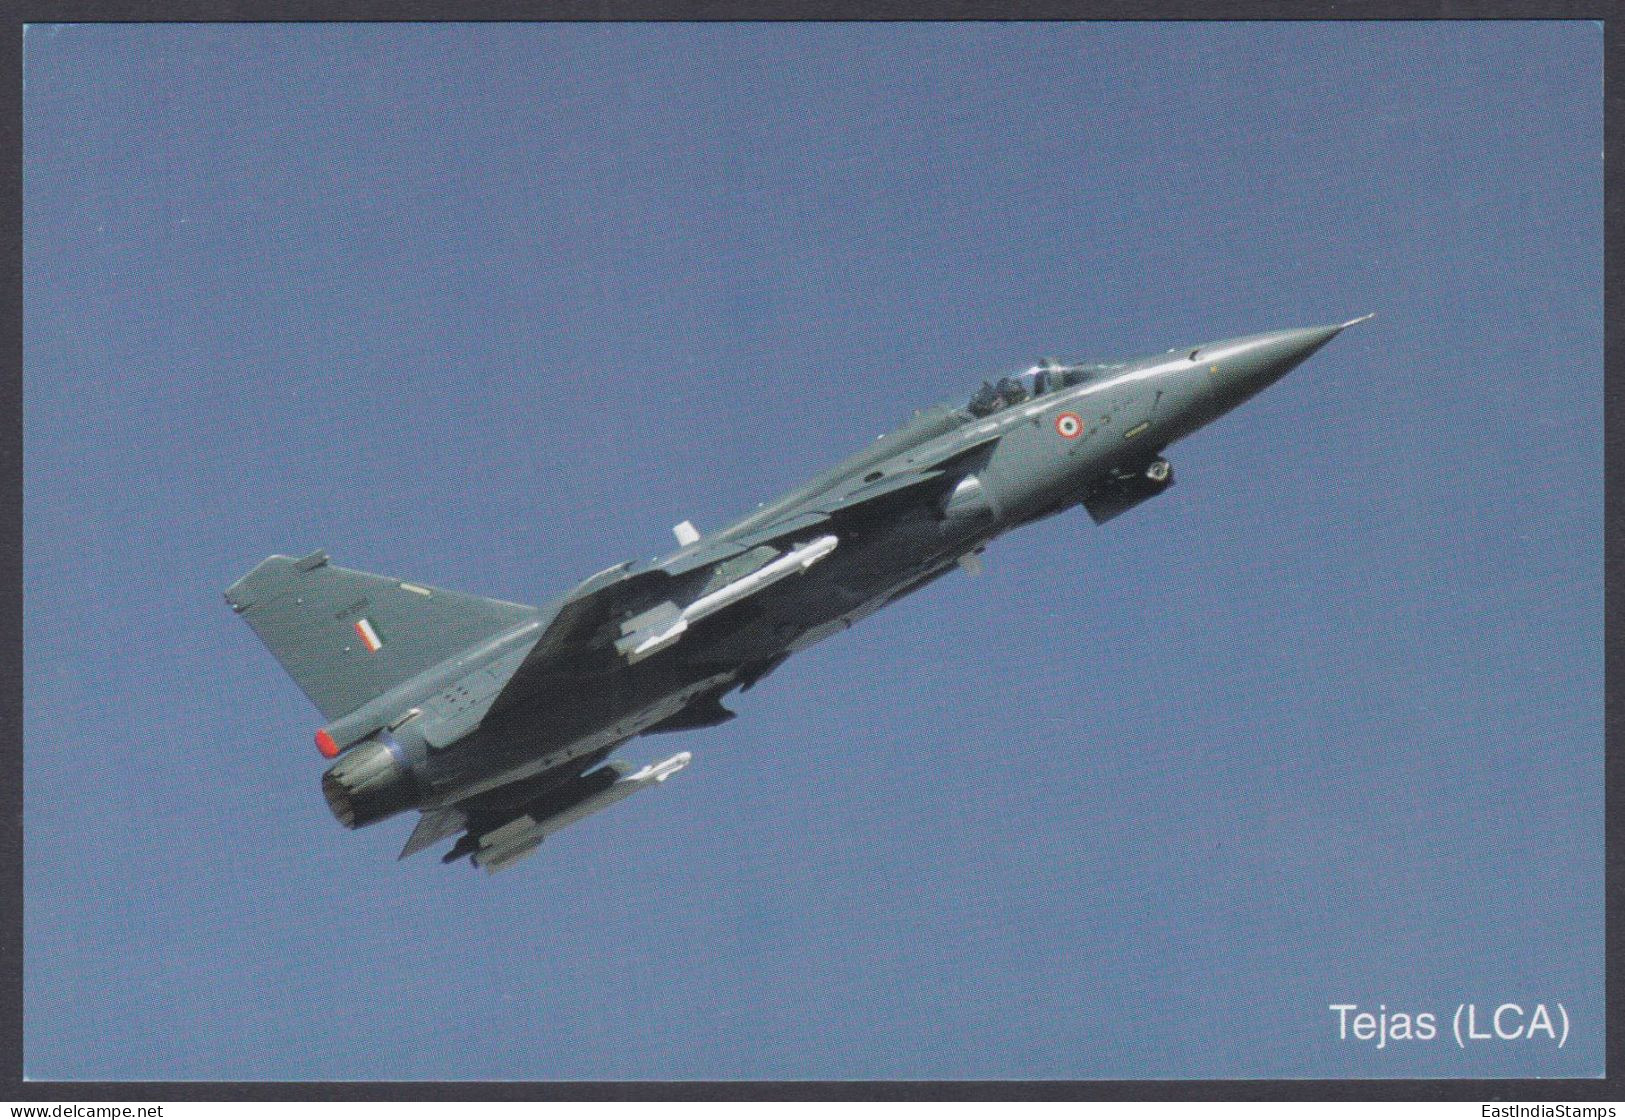 Inde India 2007 Mint Postcard Bangalore Air Show Tejas, LCA, Indian Air Force Fighter Jet, Aircraft, Airplane, Aeroplane - India